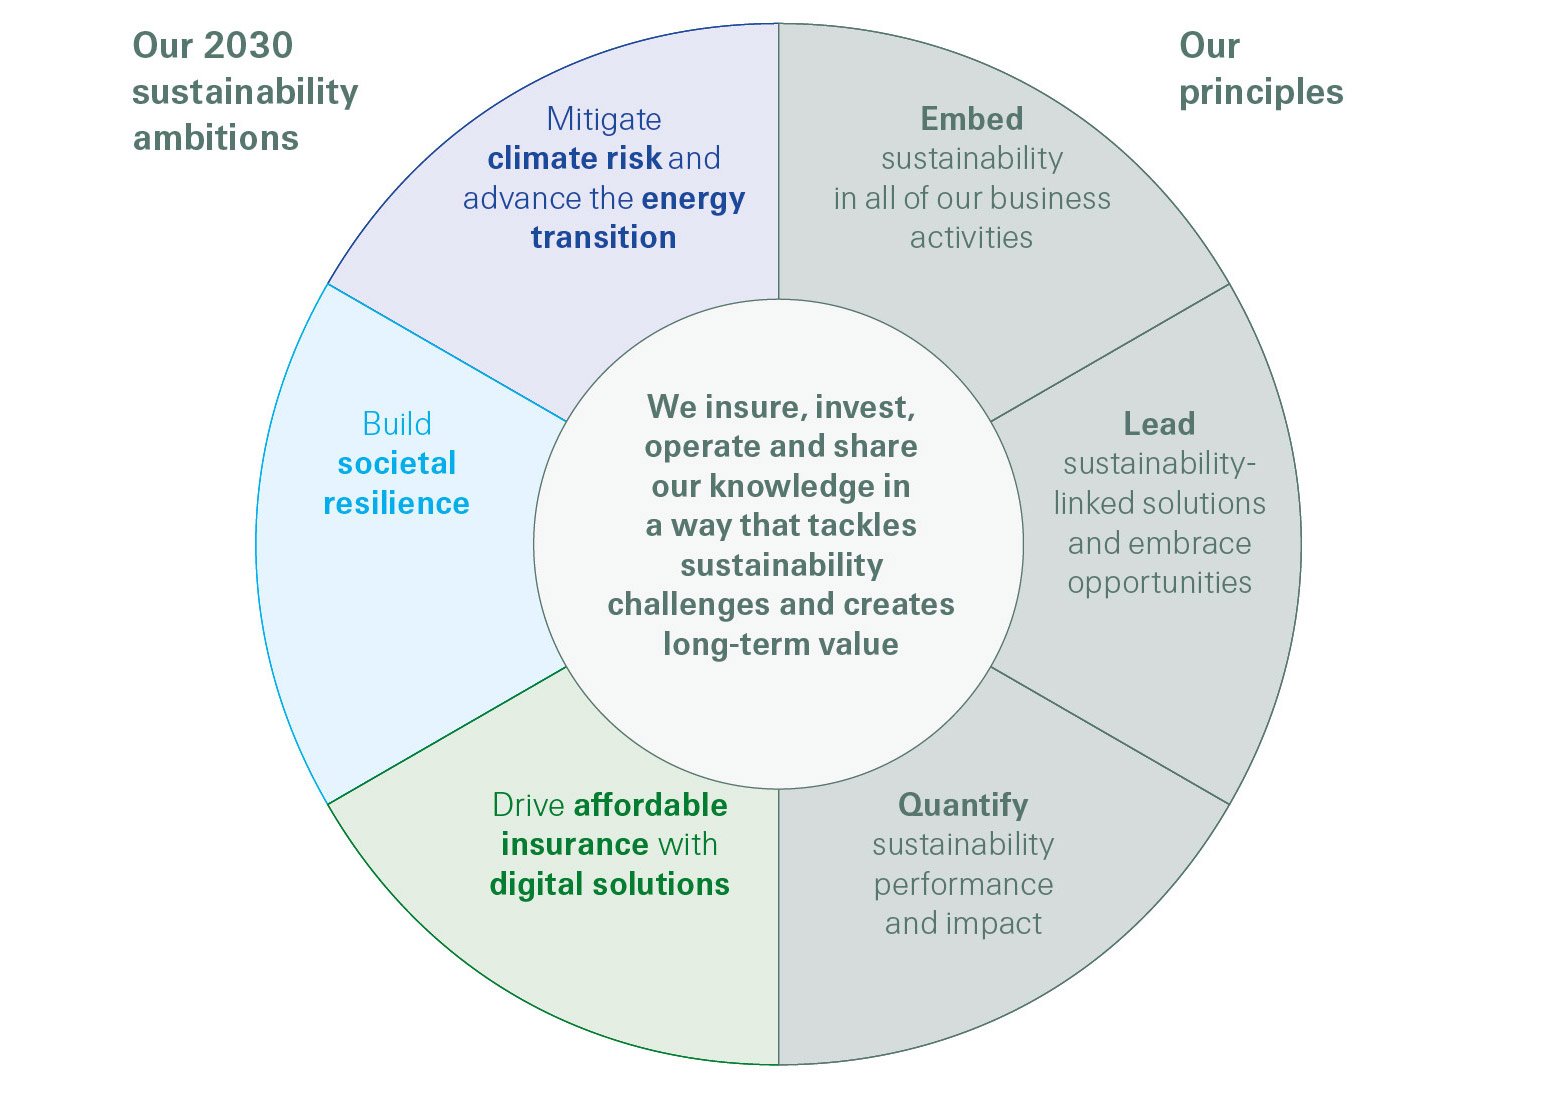 Our 2030 sustainability ambitions